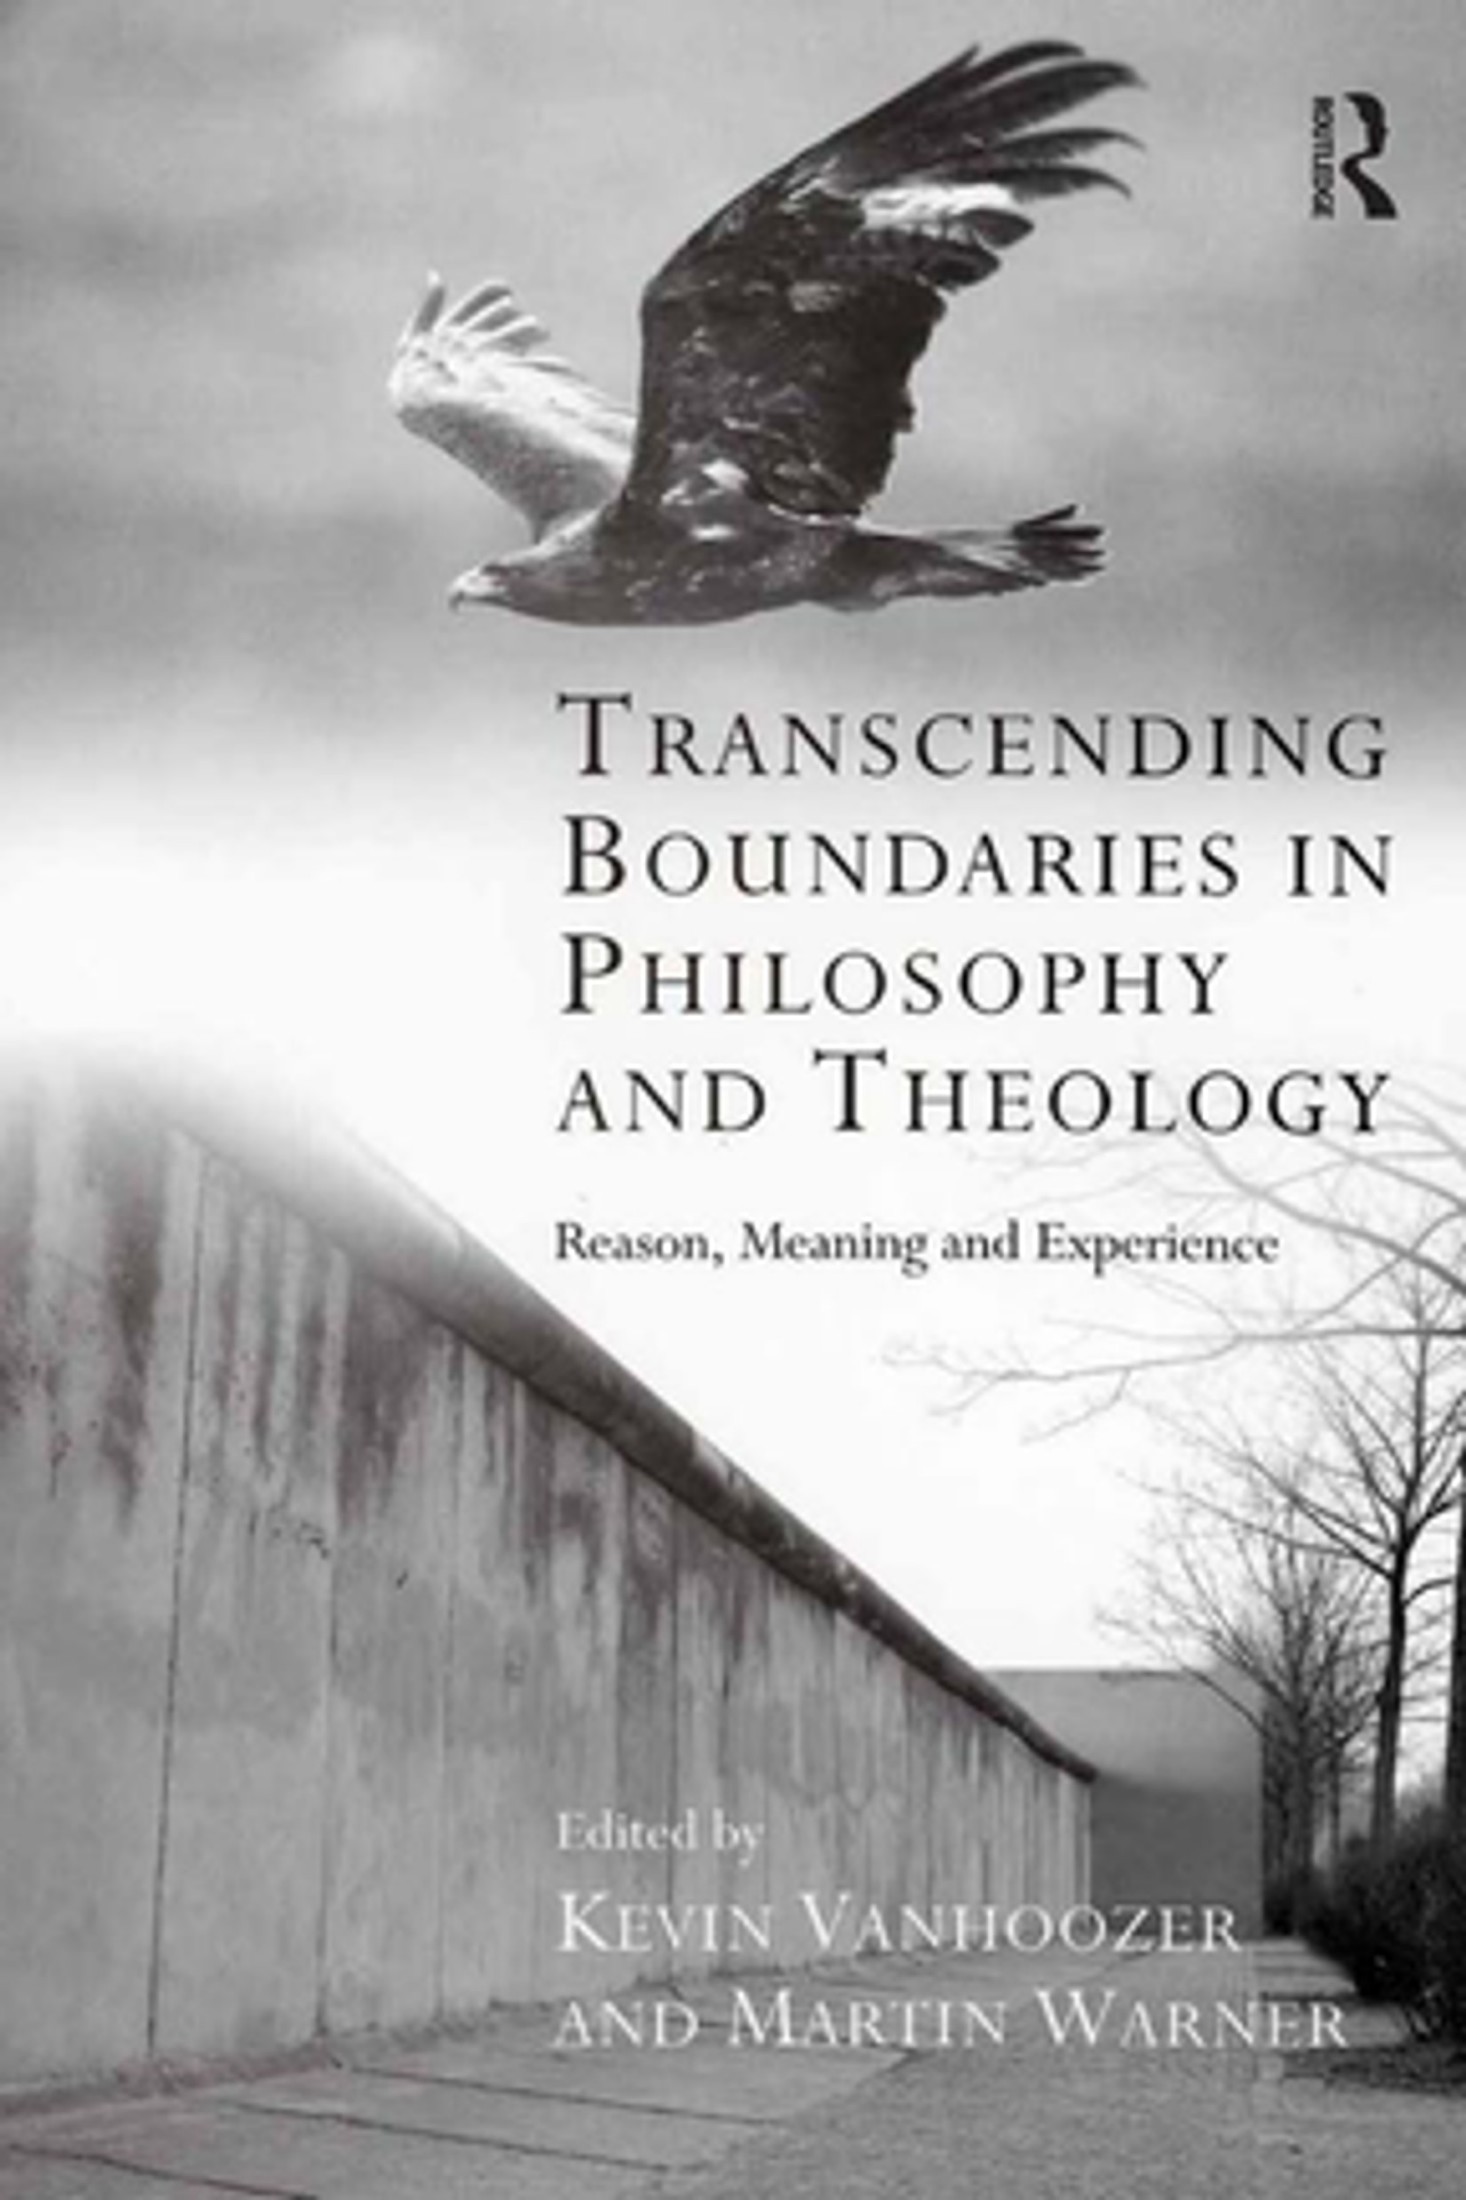 Transcending Boundaries in Philosophy and Theology: Reason, Meaning and Experience